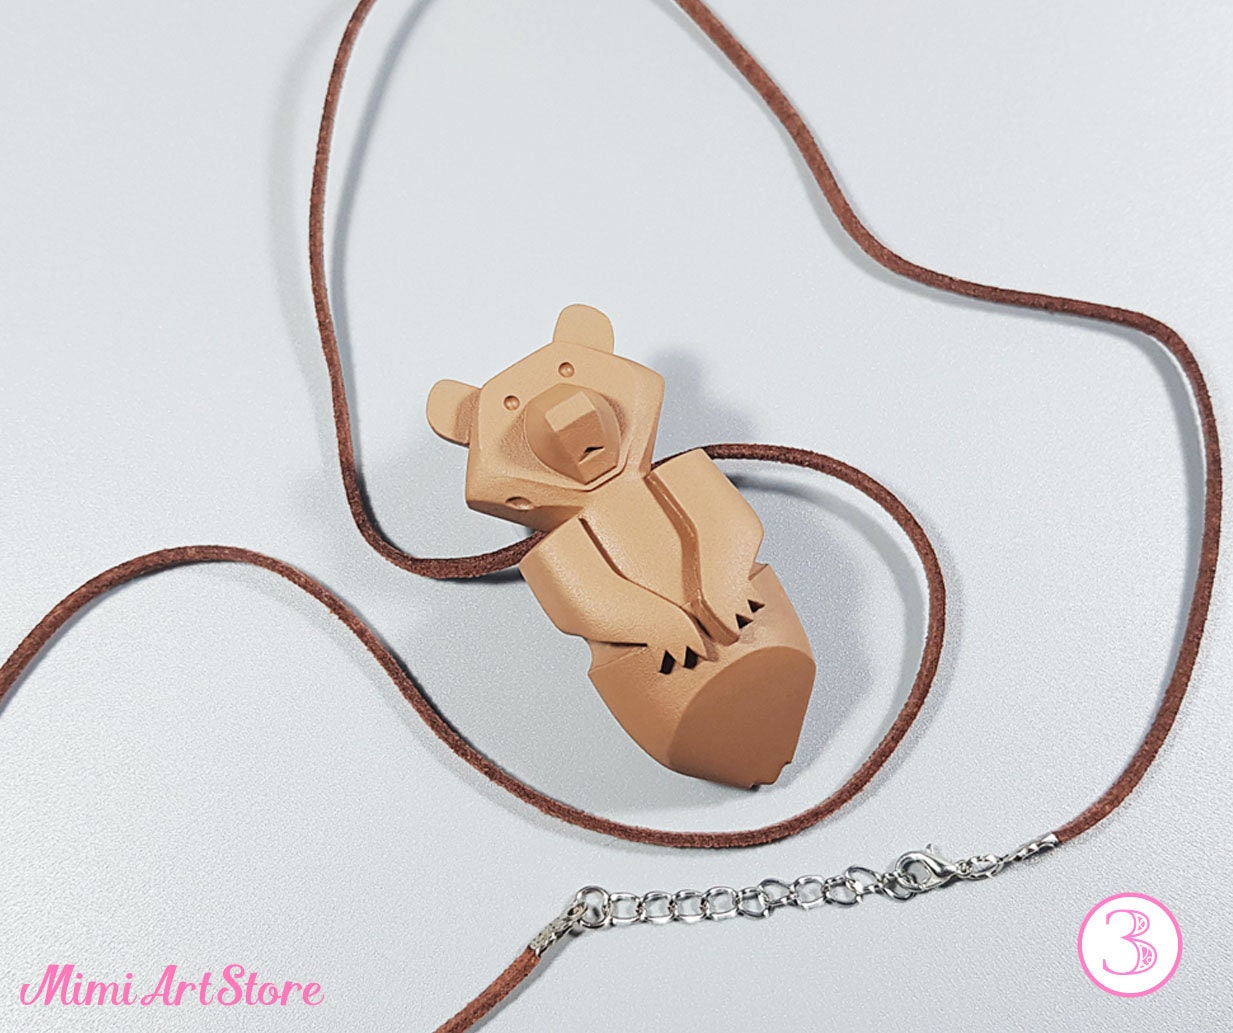 Tony Grizzly Bear Necklace– GOOD AFTER NINE